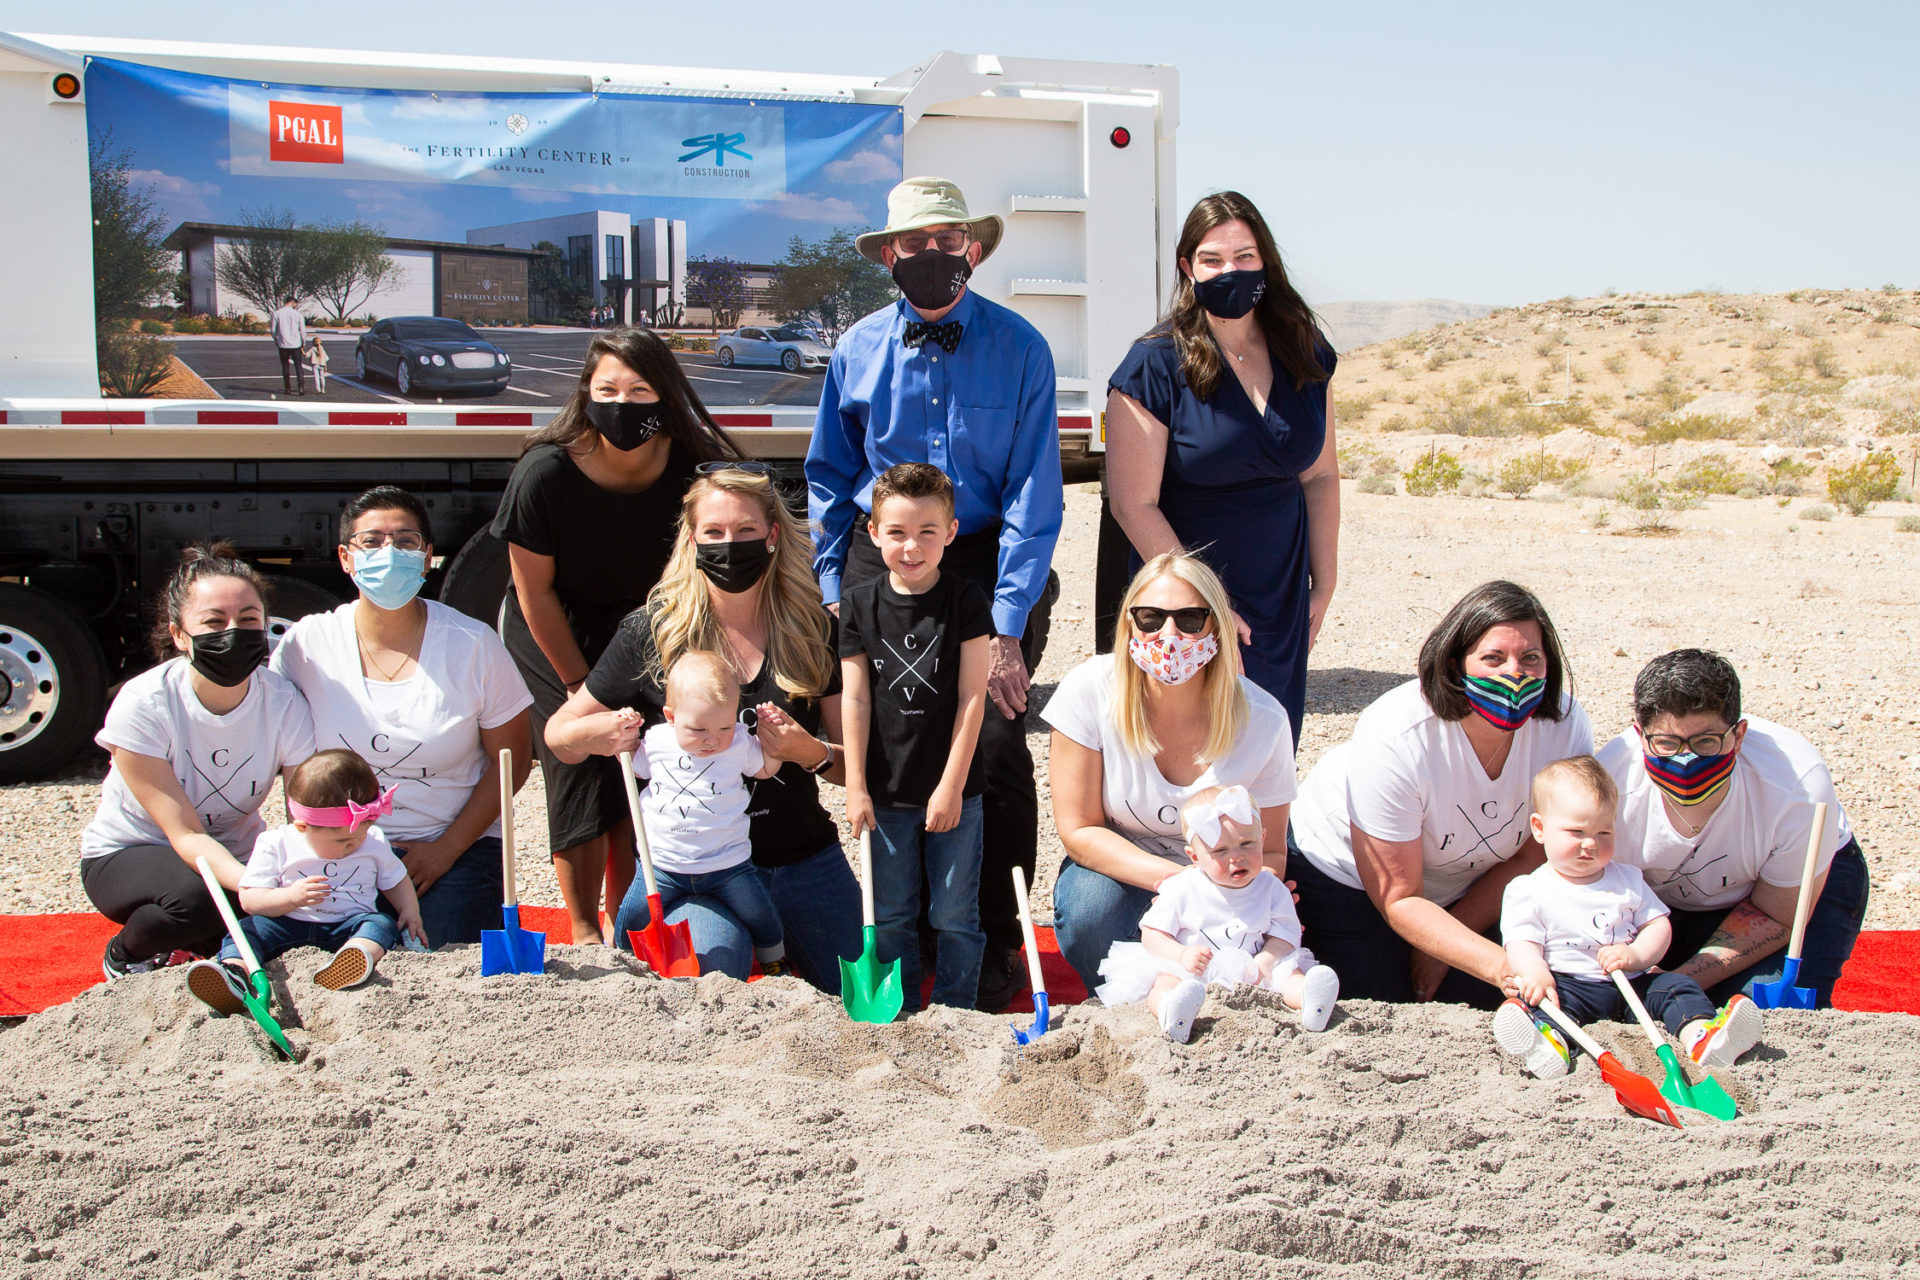 We just took a big step with our fertility center groundbreaking